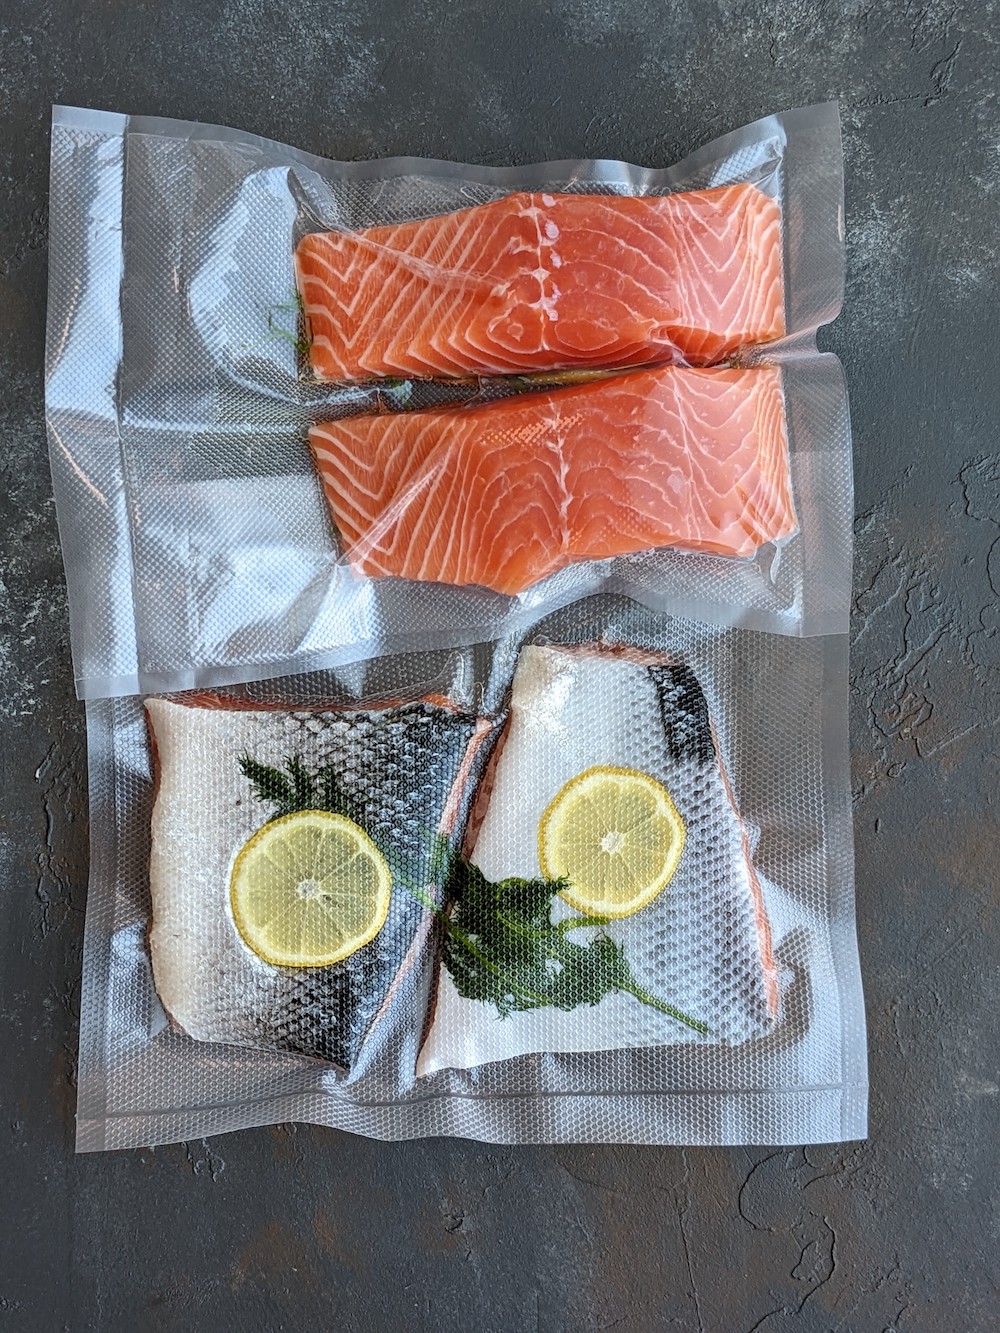 Salmon in sous vide bags